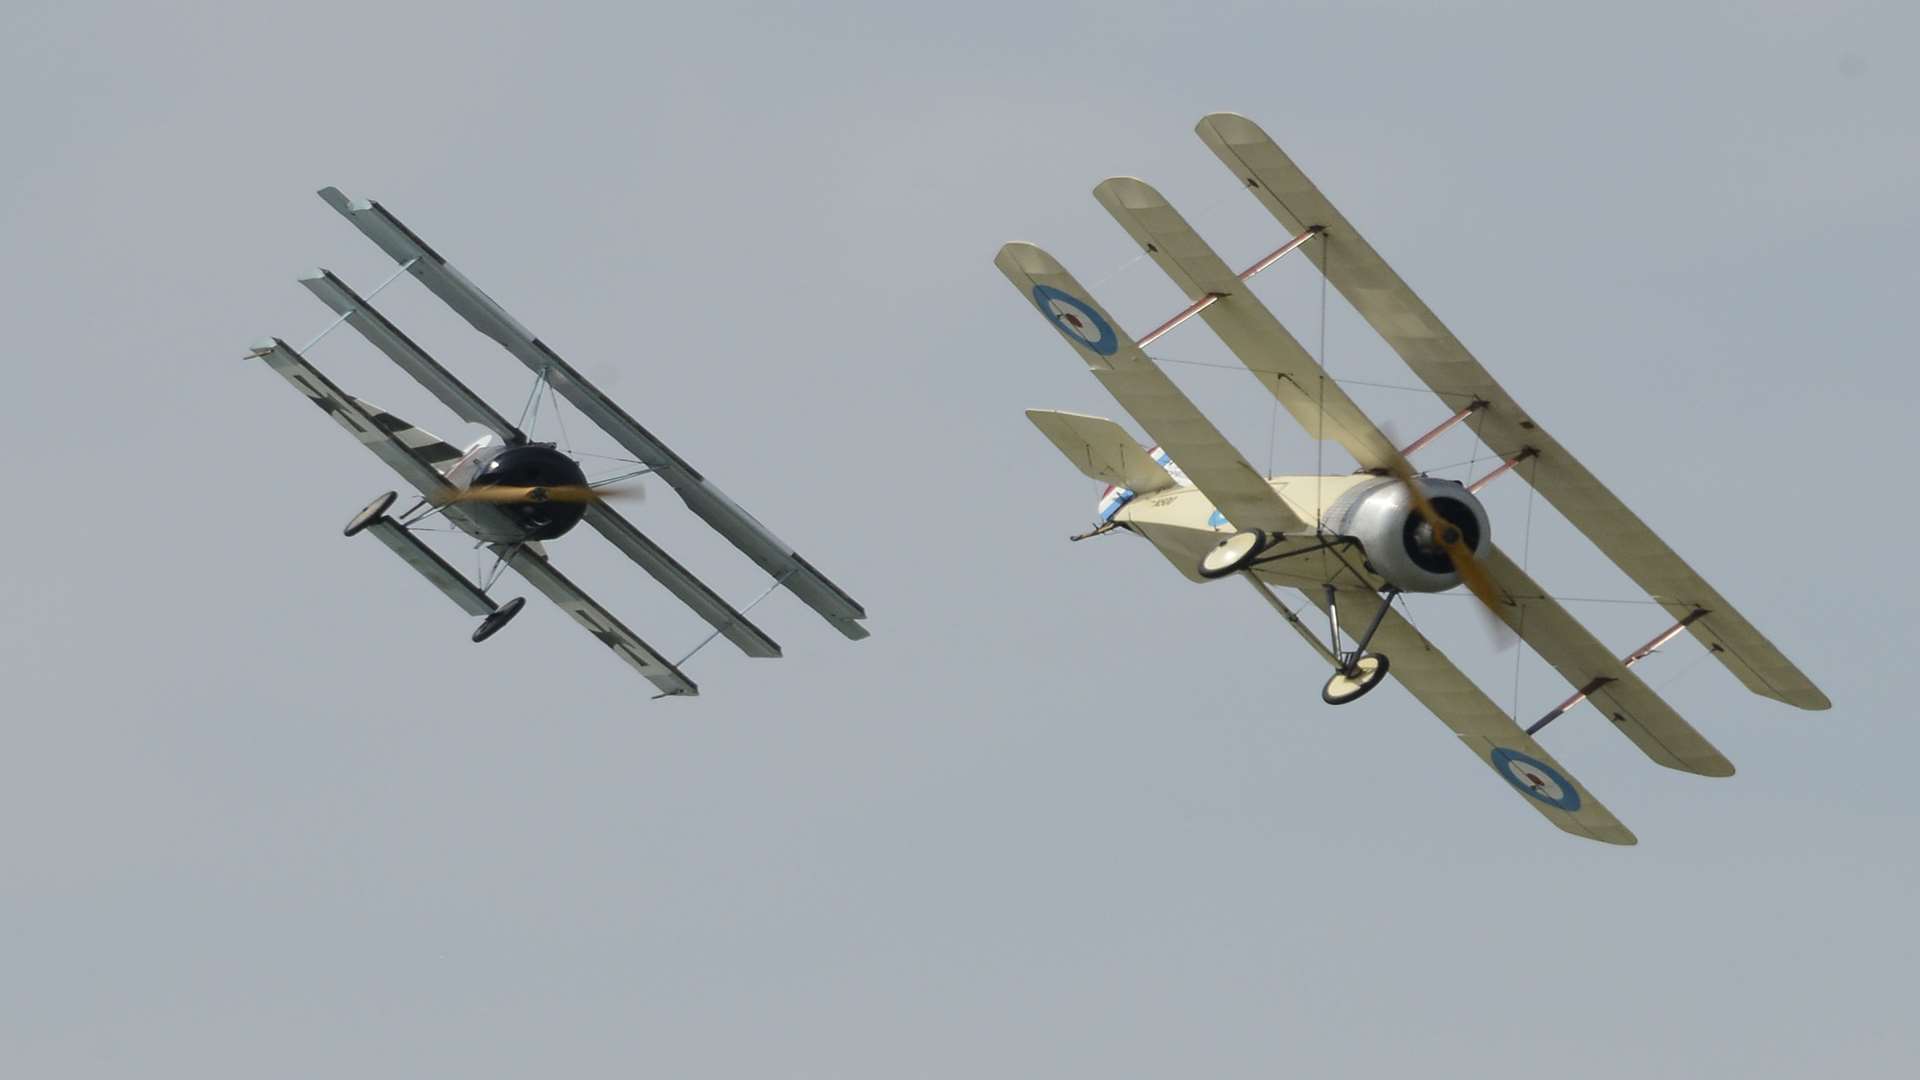 Sopwith Camel part of the Great War Display team chased by Fokker flown by Bruce Dickenson of Iron Maiden. Picture: Paul Amos